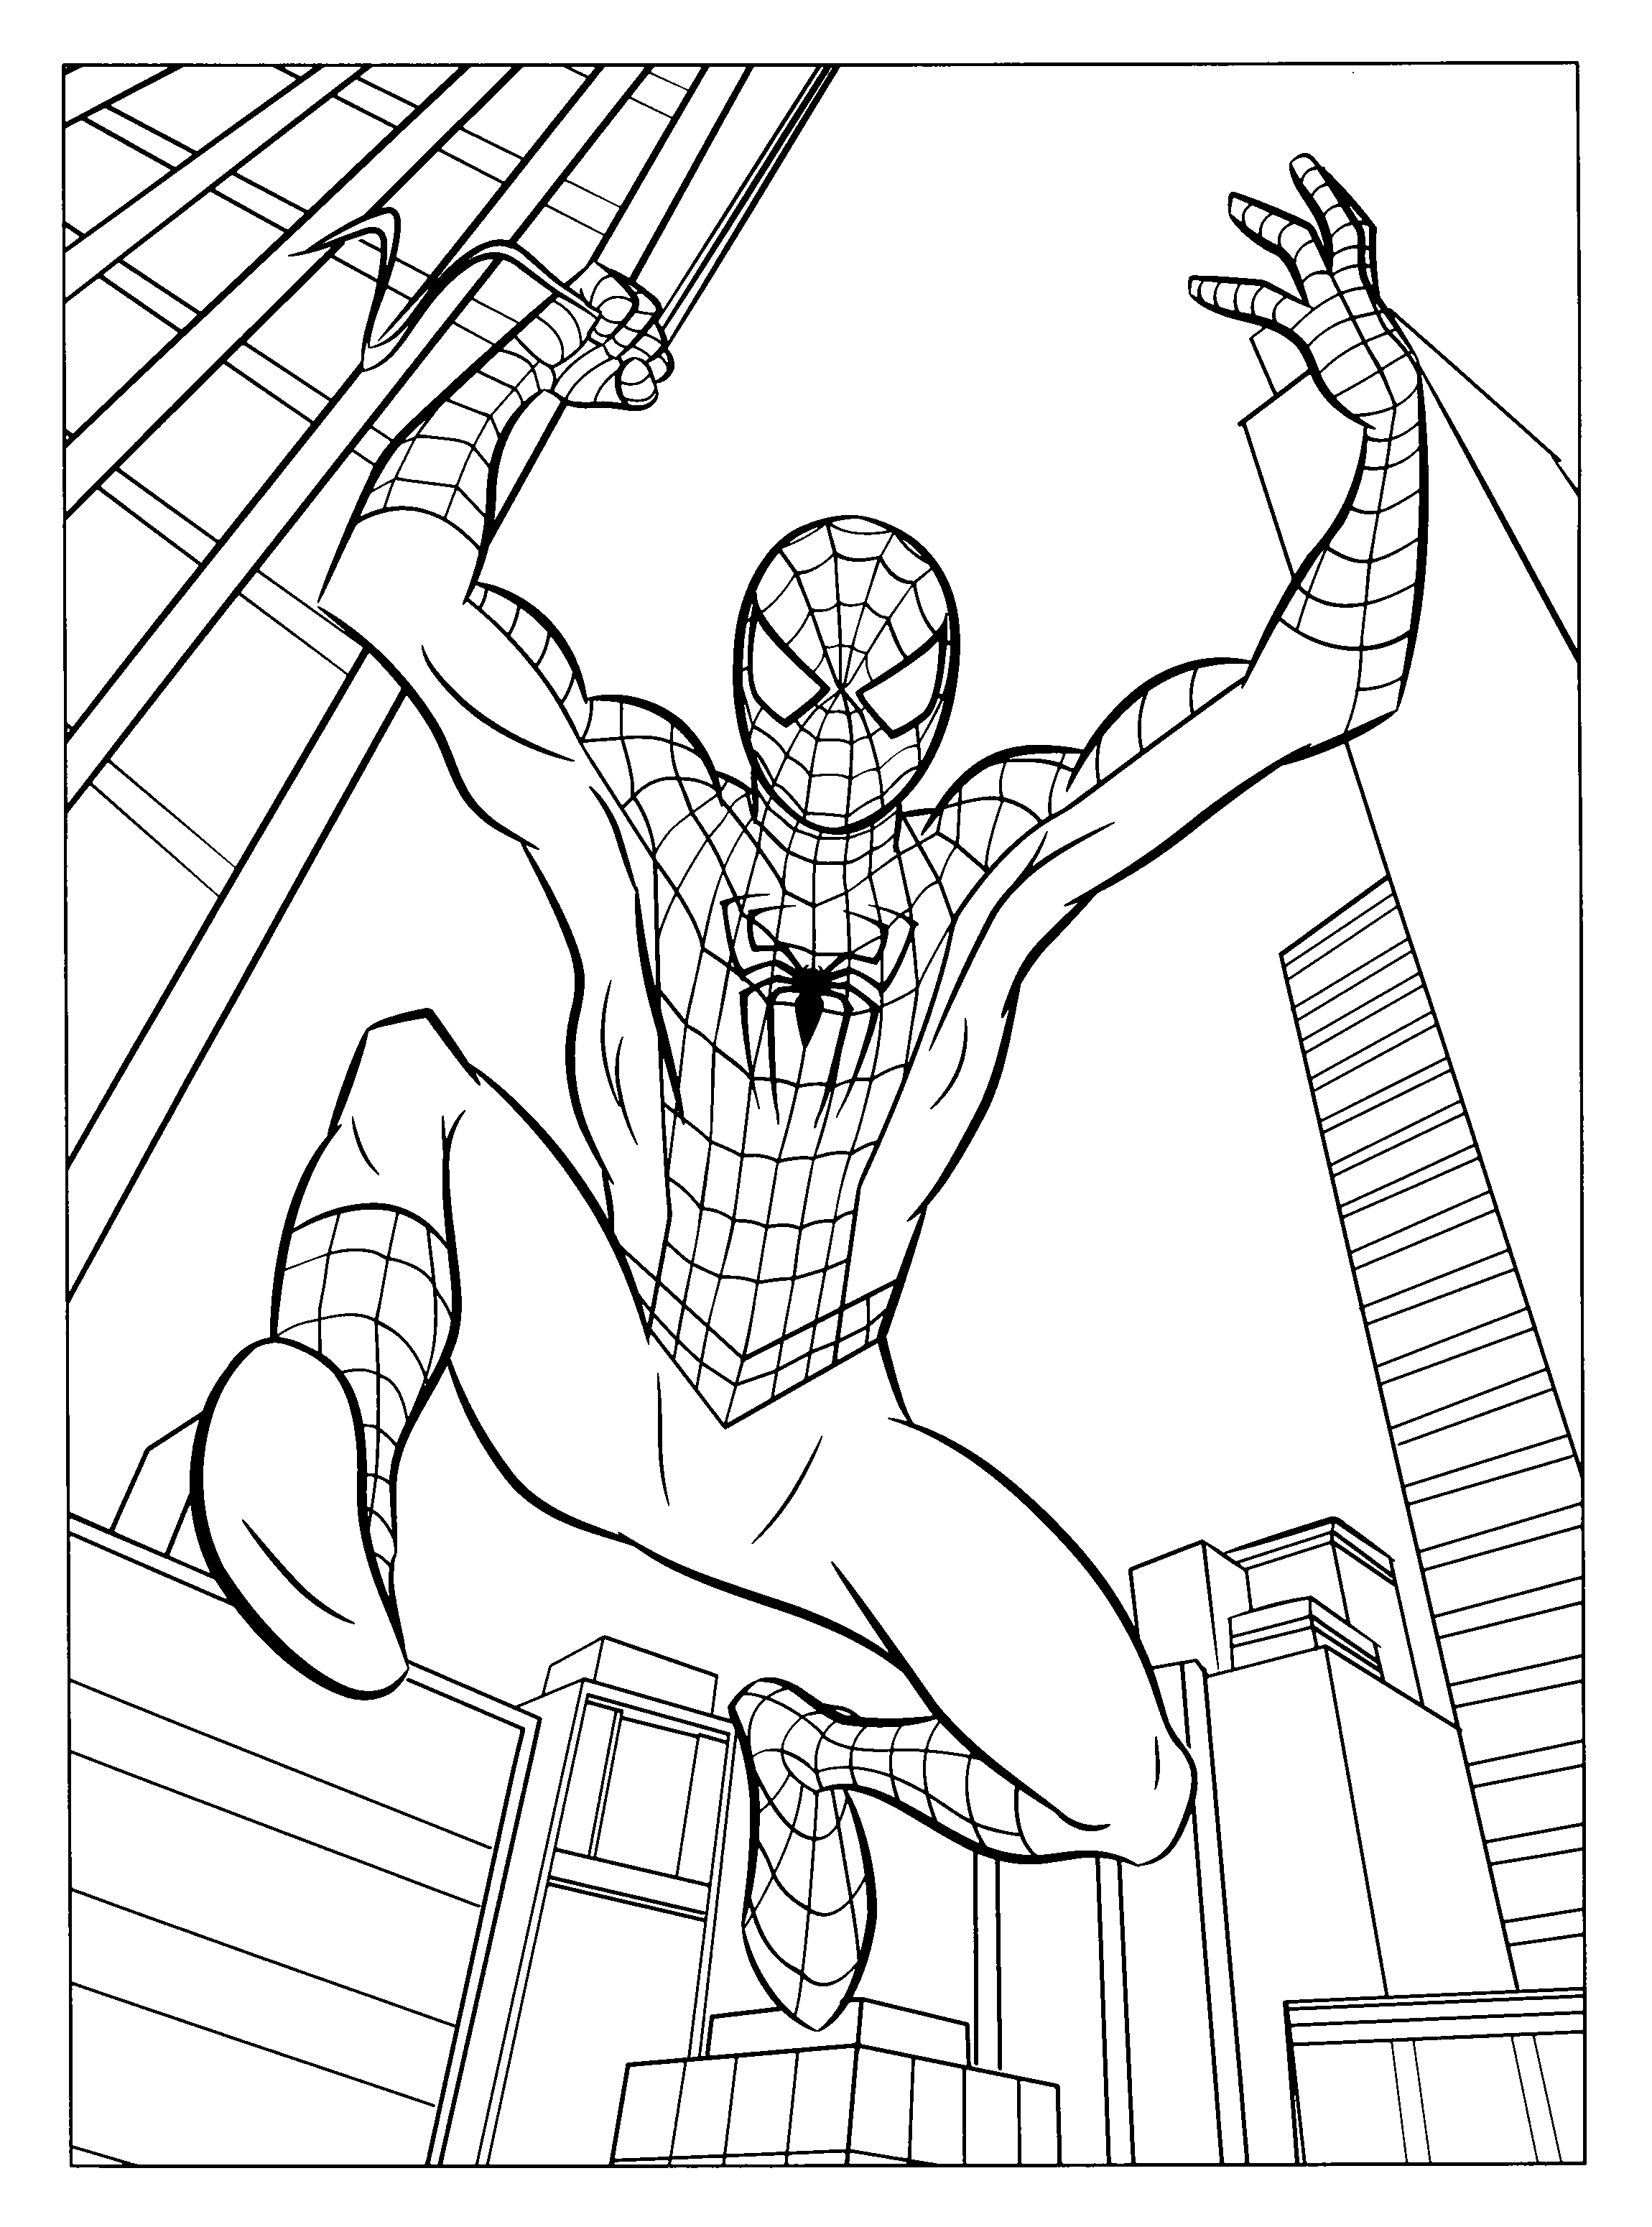 Spiderman for kids - Spiderman Kids Coloring Pages